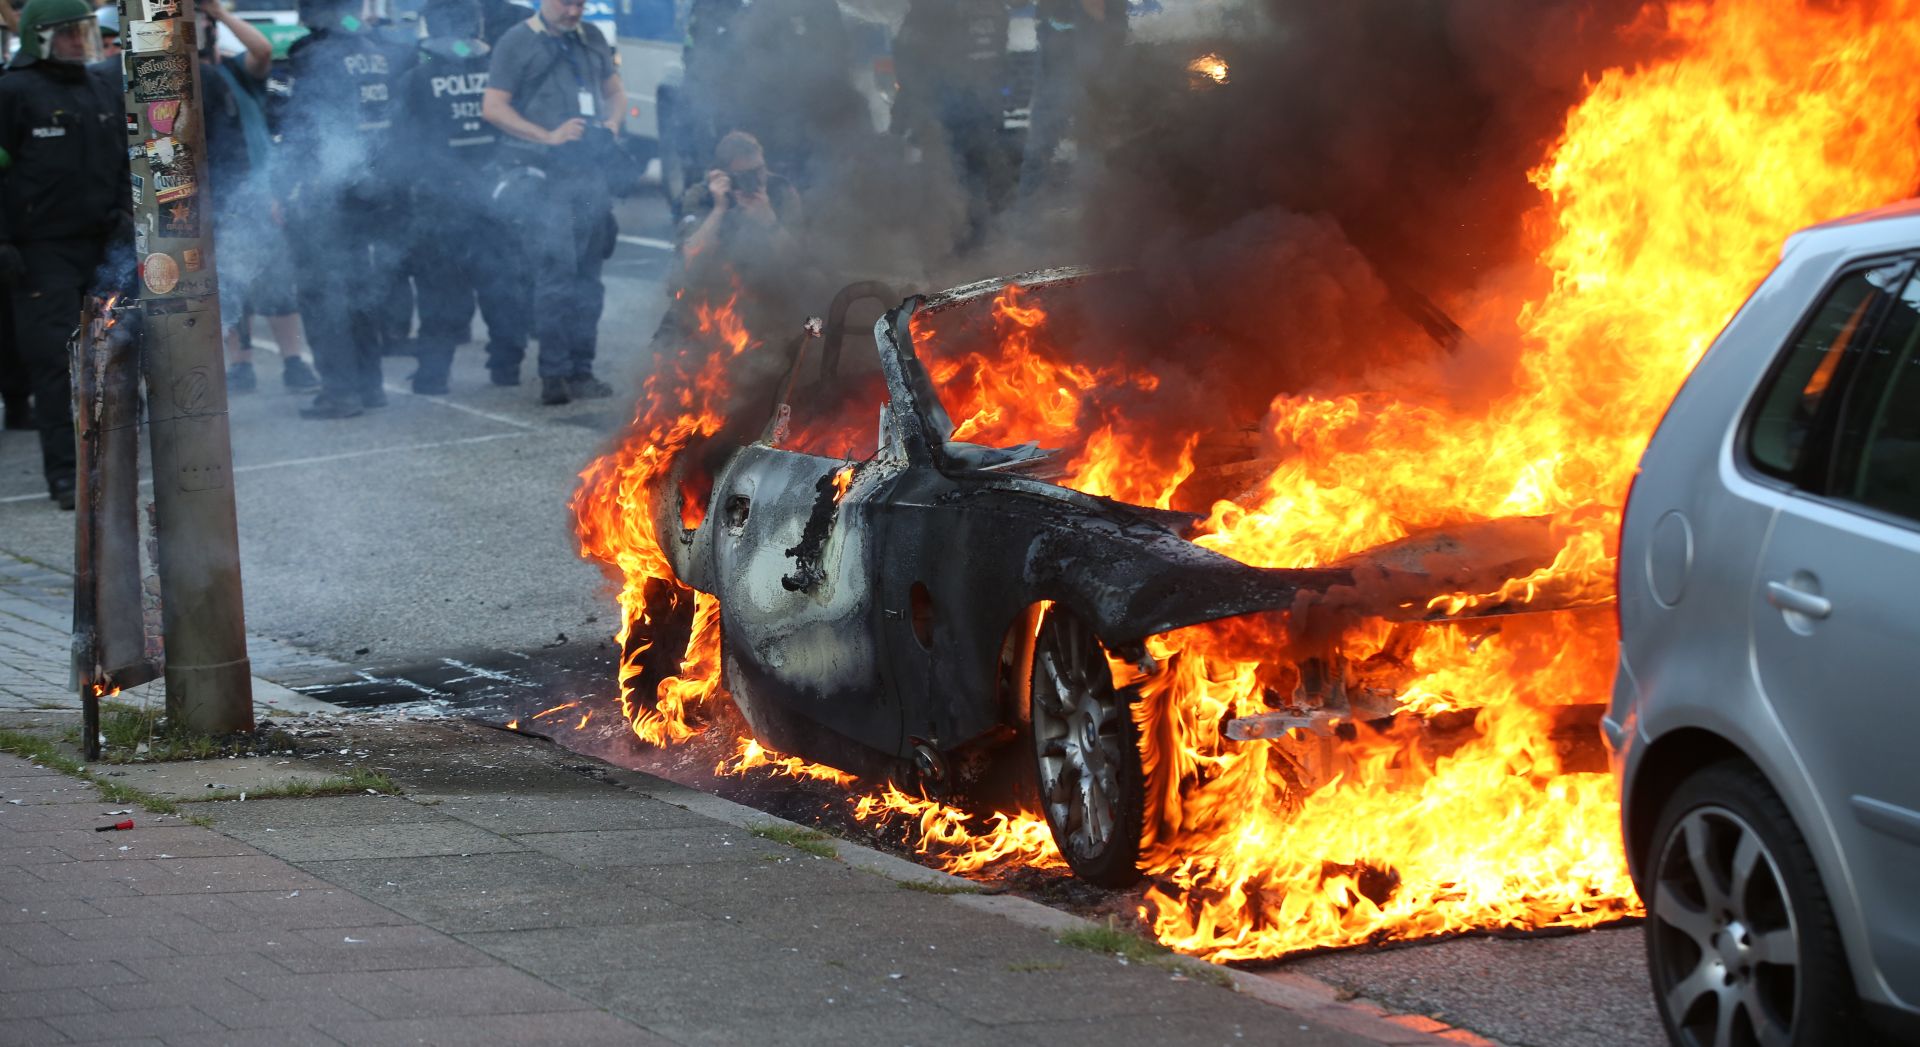 A car burns during the demonstration "G20 Welcome to hell" in Hamburg, Germany, 06 July 2017. The G20 Summit of the heads of government and state takes place on 7 and 8 July 2017 in Hamburg. Photo: Bodo Marks/dpa